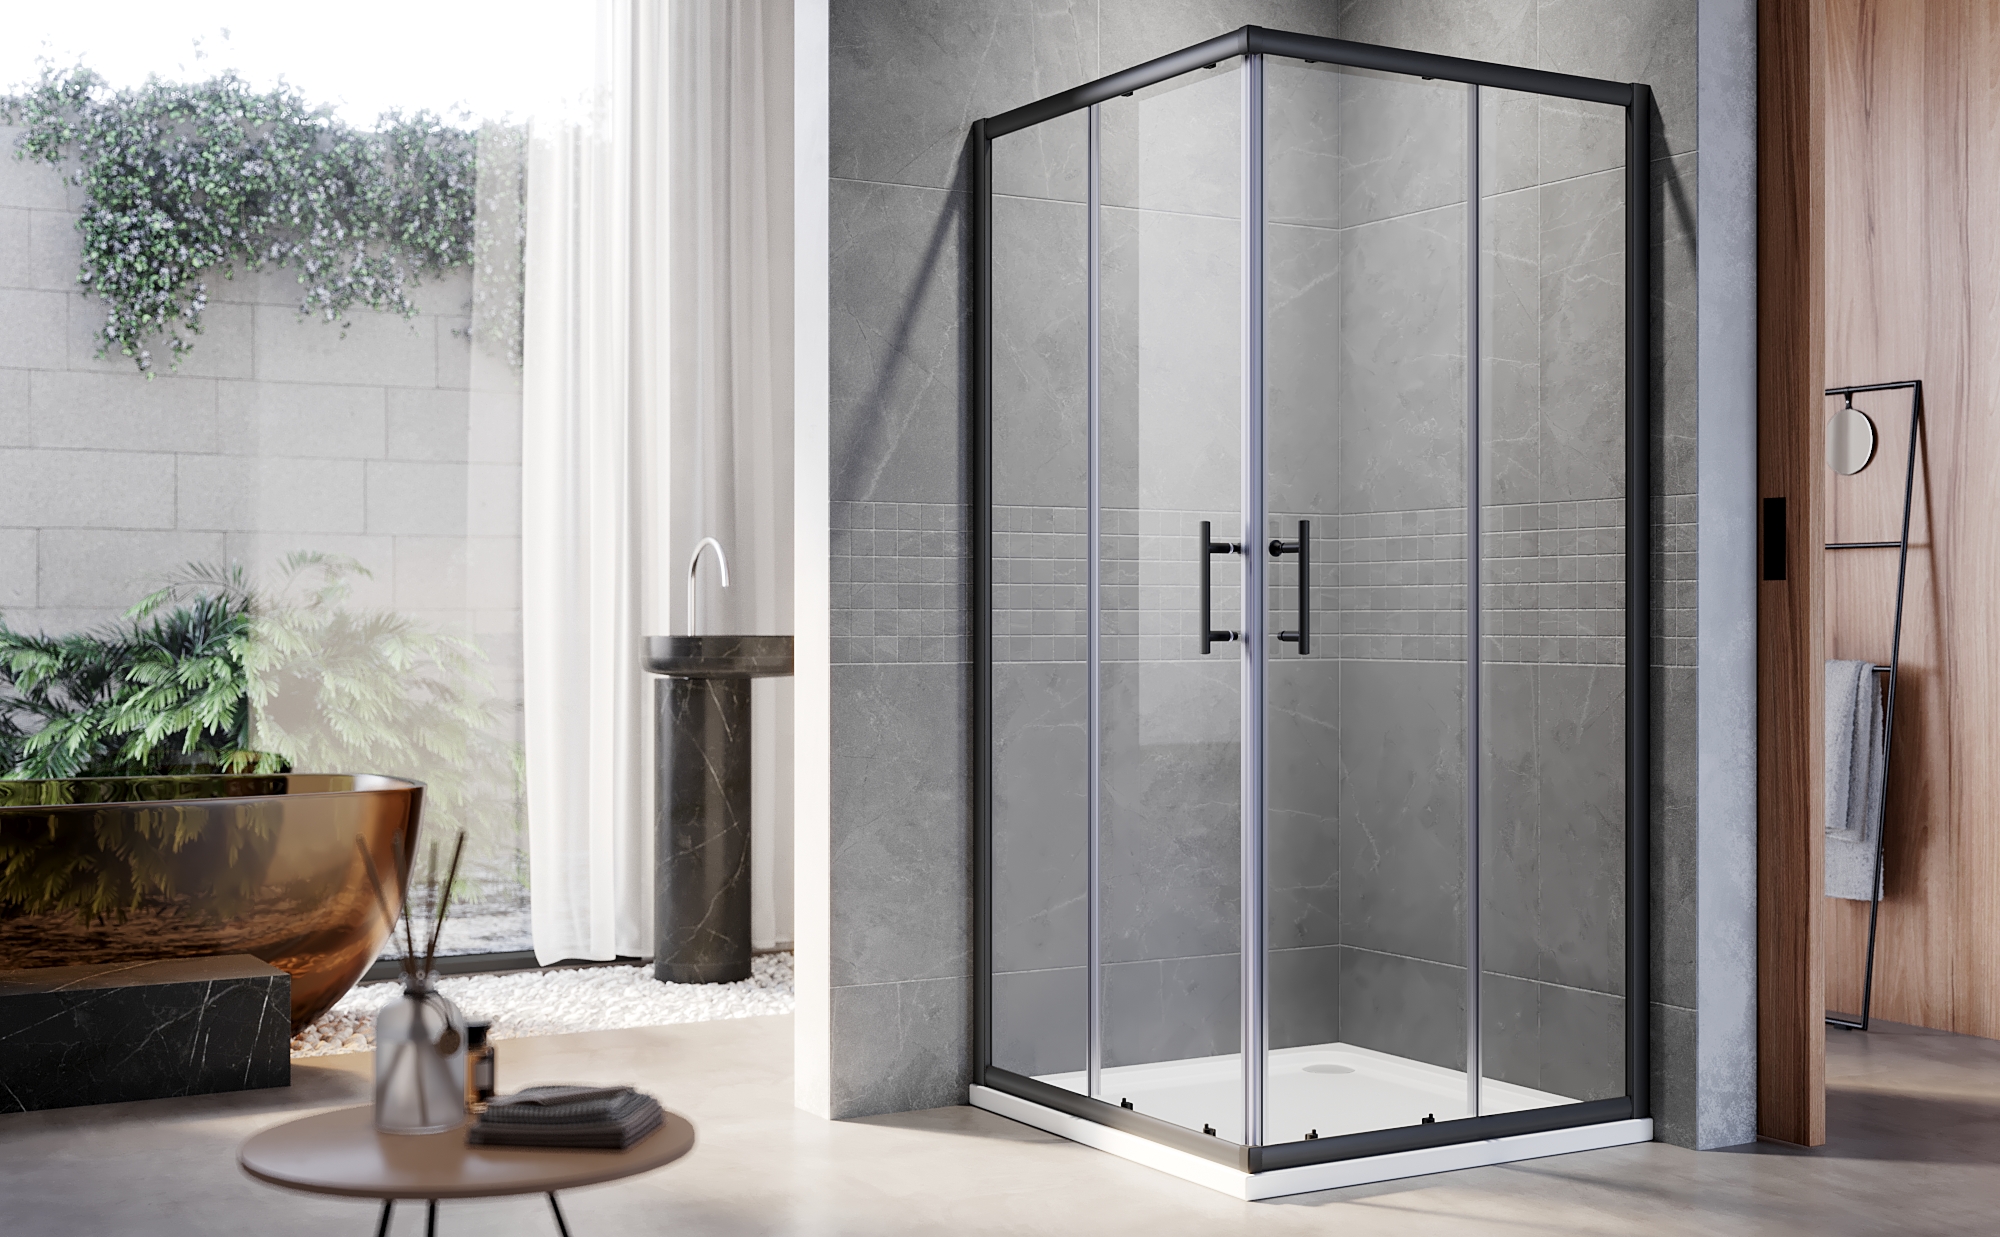 The Ultimate Guide to Choosing the Perfect Corner Shower for Your